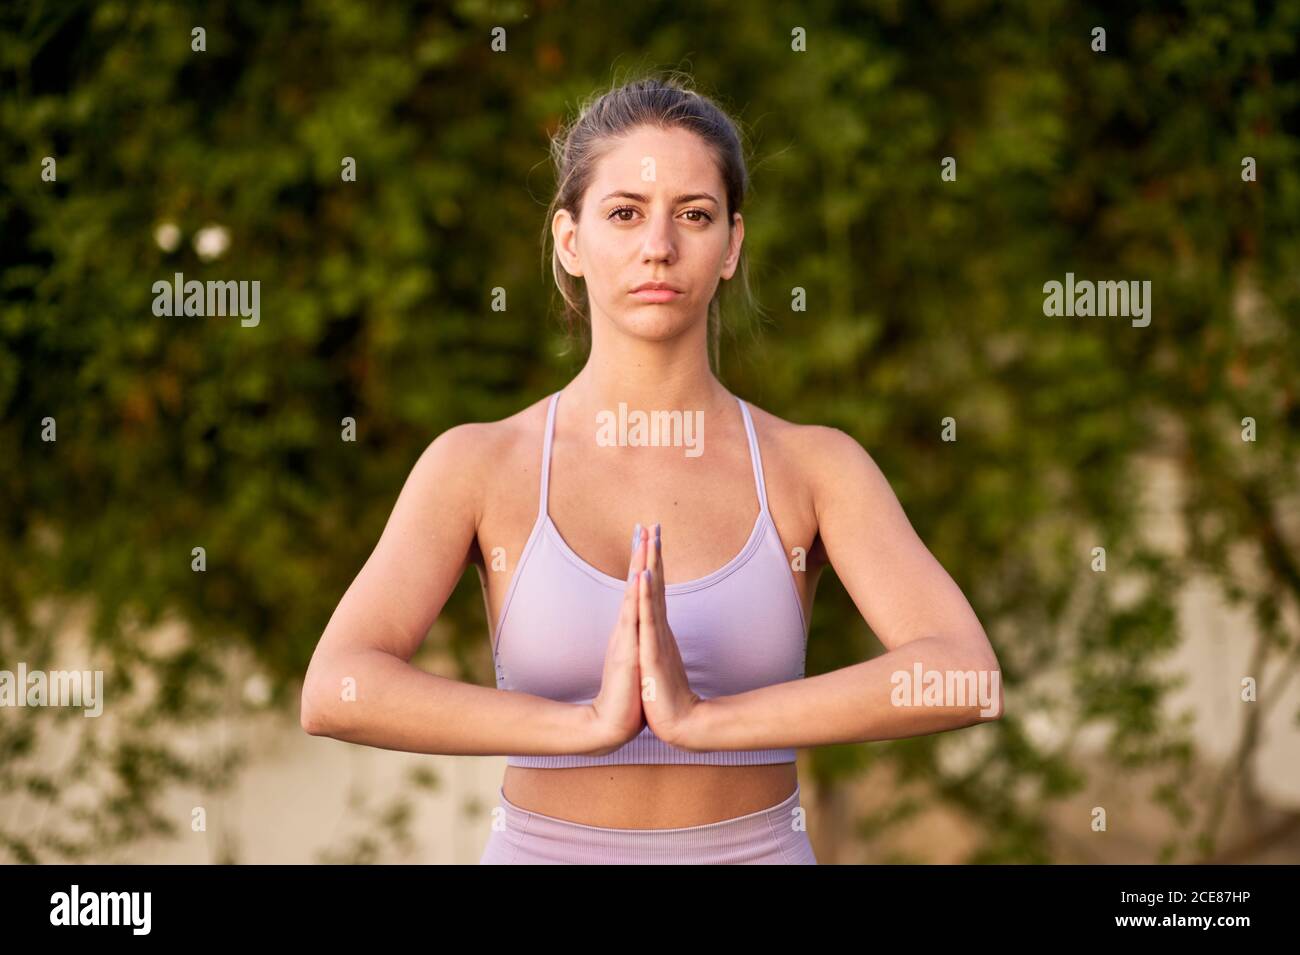 Tranquil female in sports leggings and bra with Namaste hands gesture while doing yoga and looking at camera Stock Photo